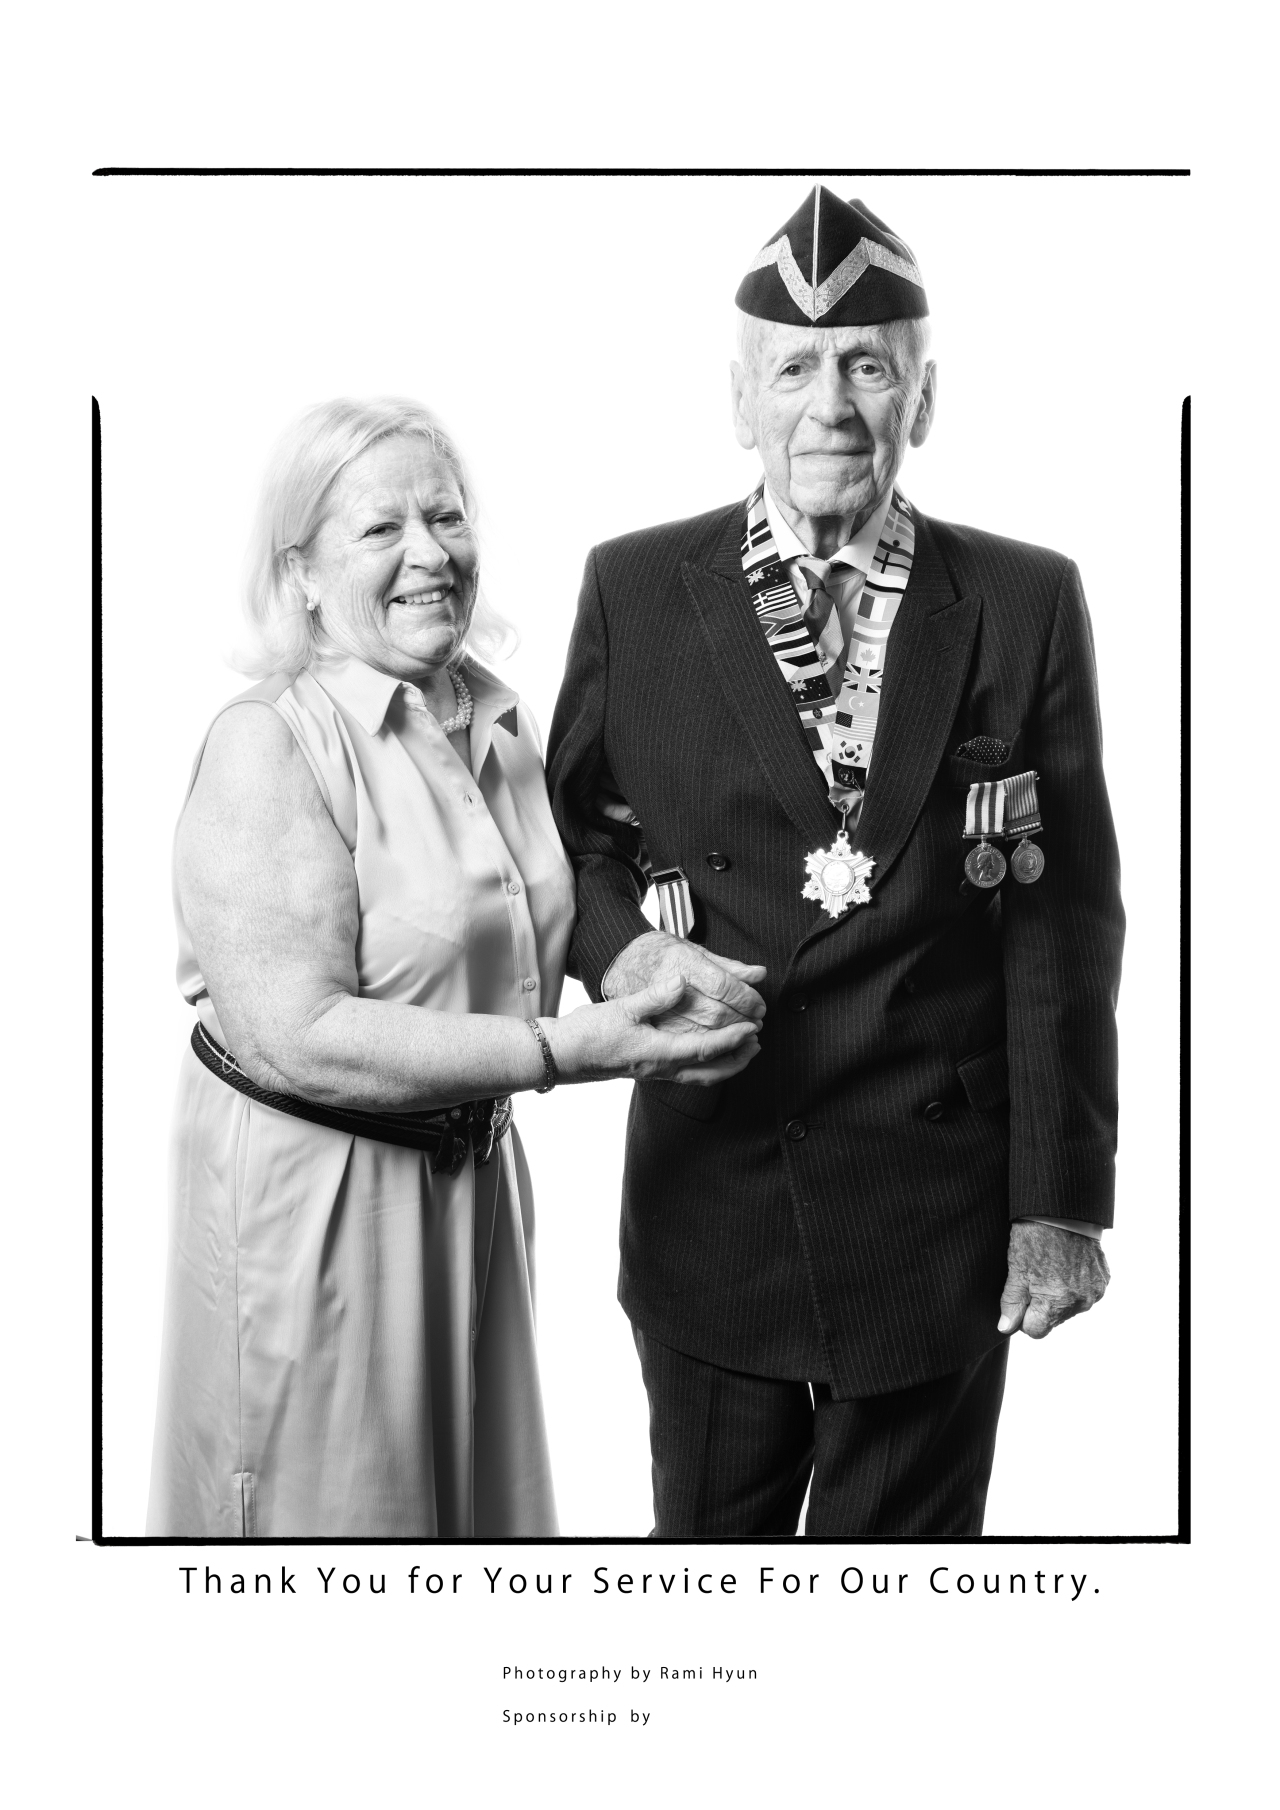 The late Capt. Christopher Coldrey (right) and Mrs. Coldrey (Courtesy of Rami Hyun)